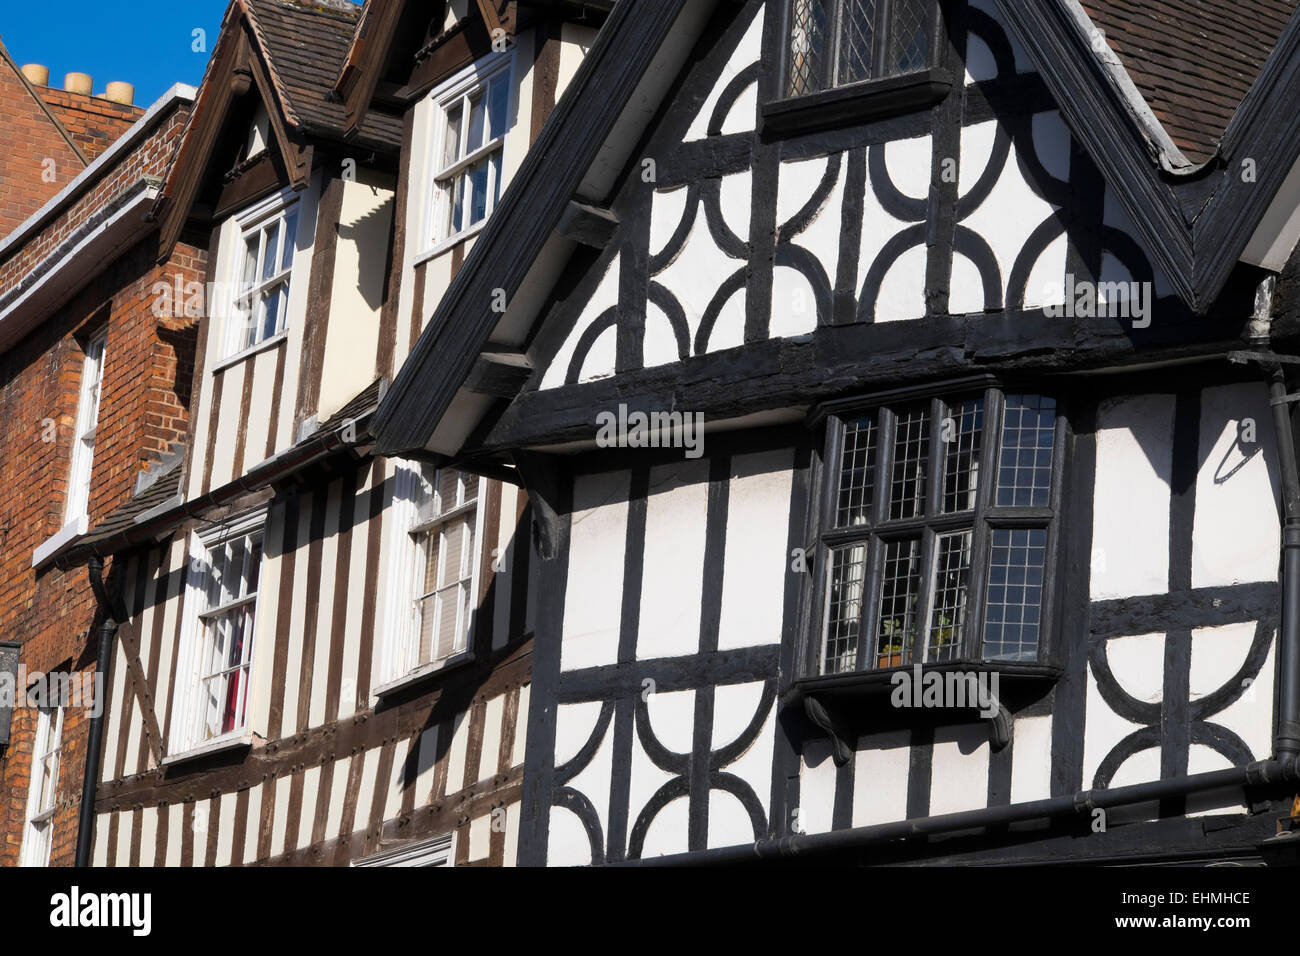 Timber-framed buildings on Wyle Cop, Shrewsbury, Shropshire. Stock Photo